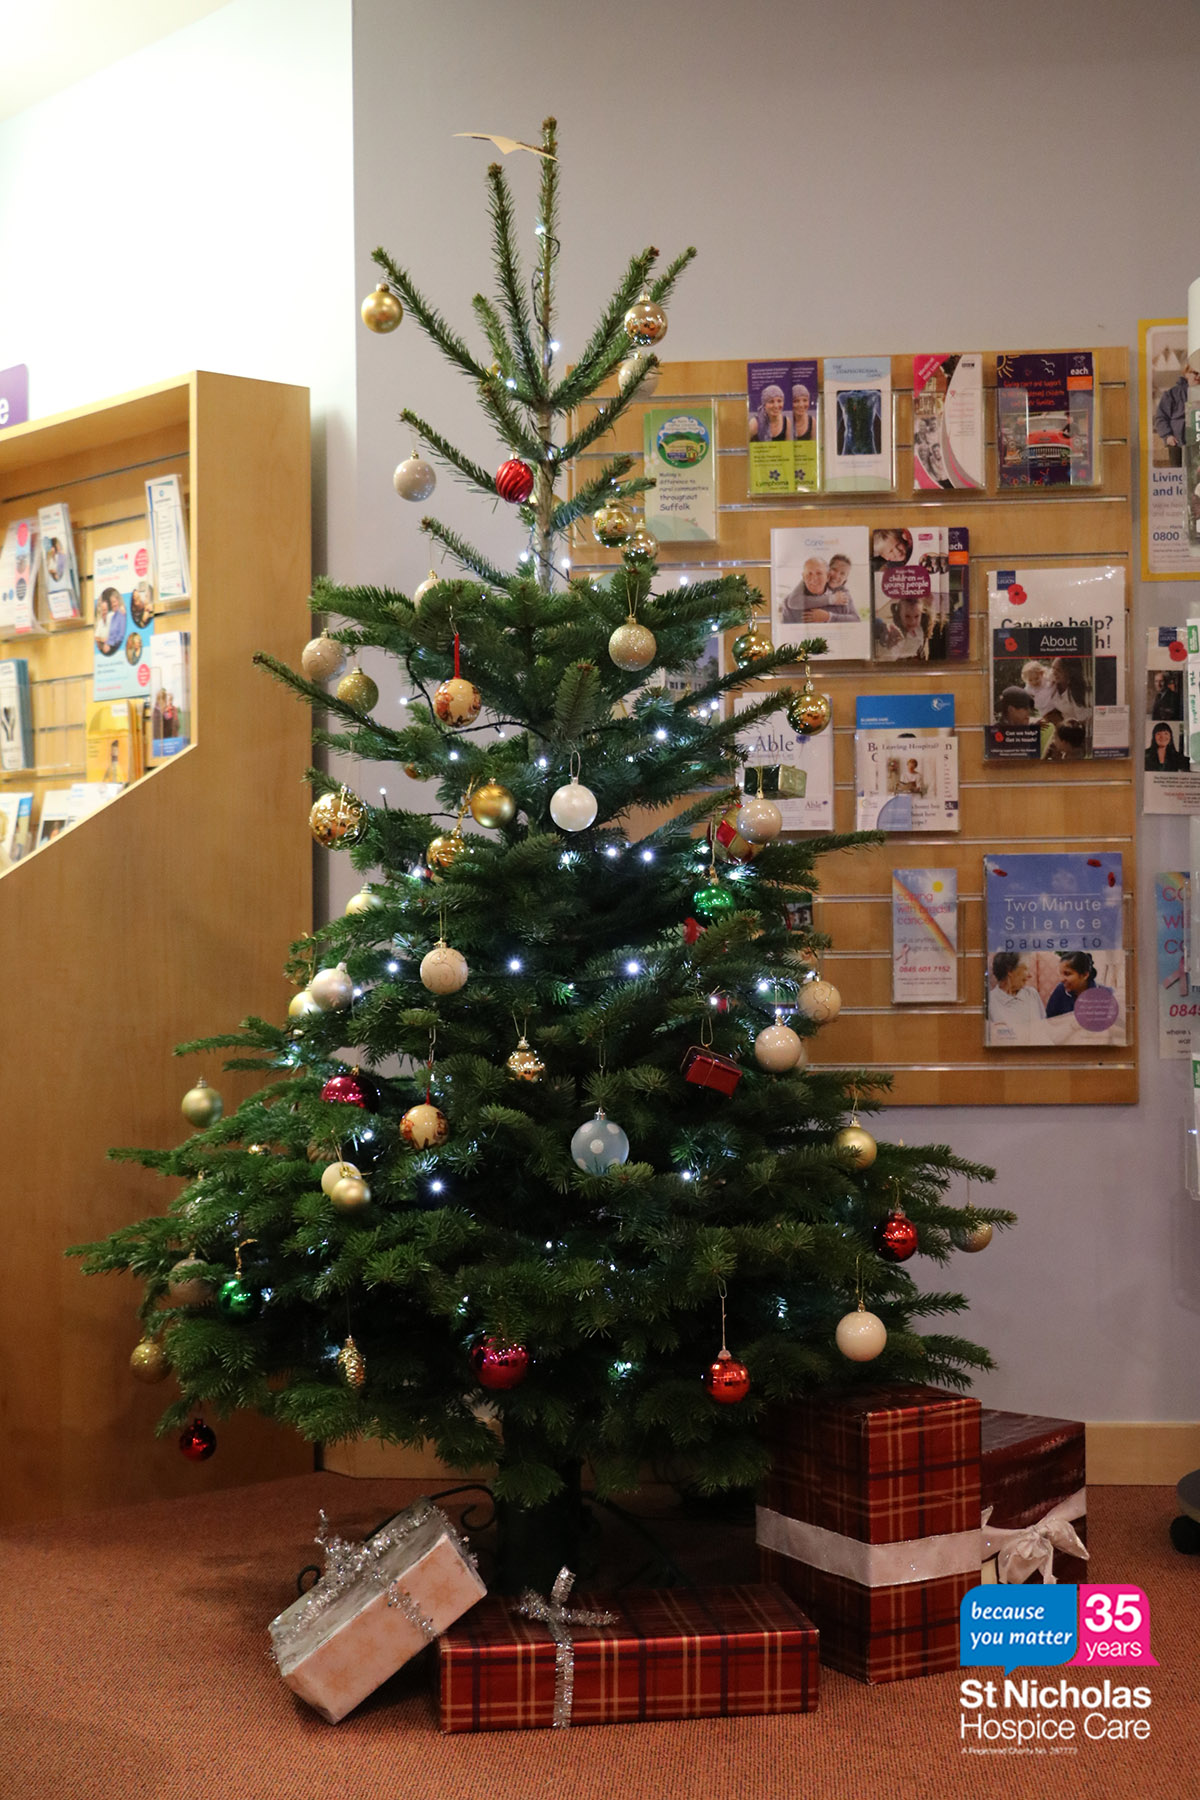 35 stories for 35 years: Christmas time at the Hospice